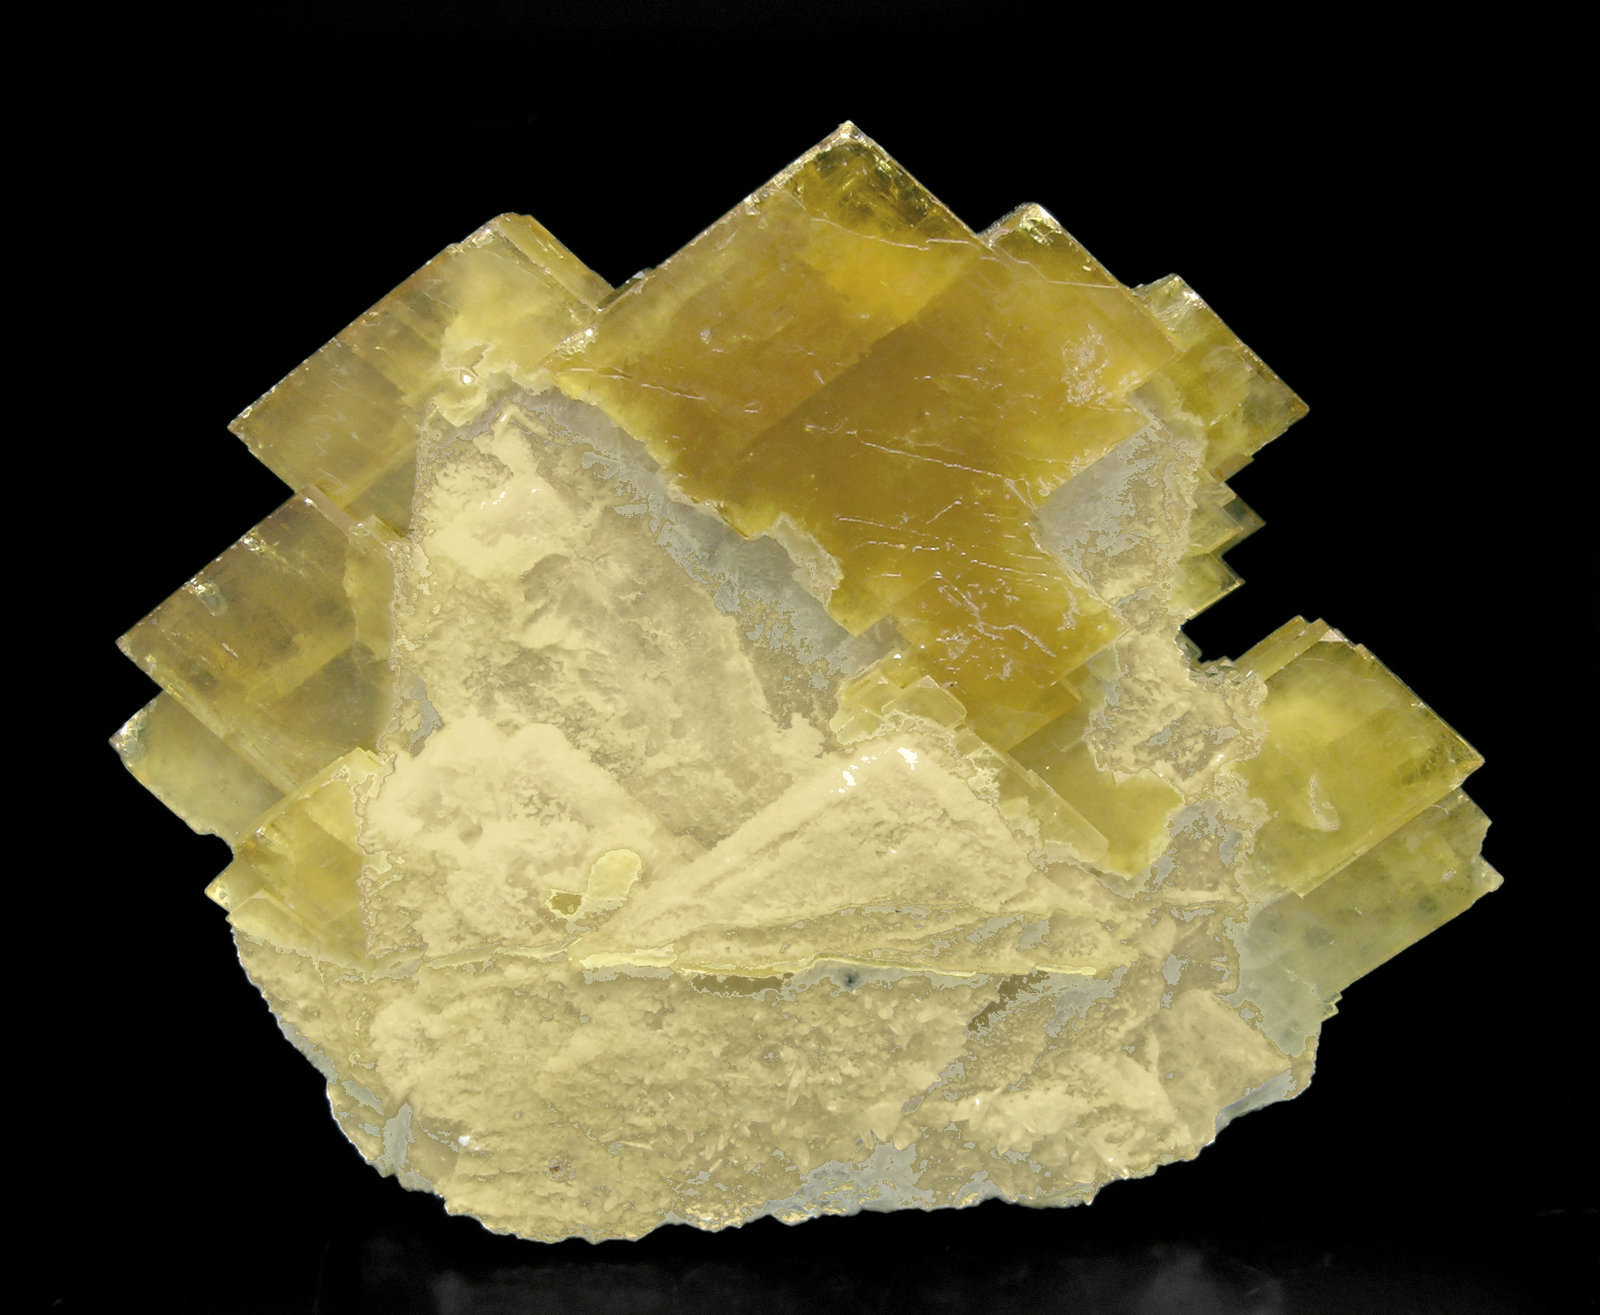 specimens/s_imagesM8/Doubly_terminated_Barite-KH86M8r.jpg